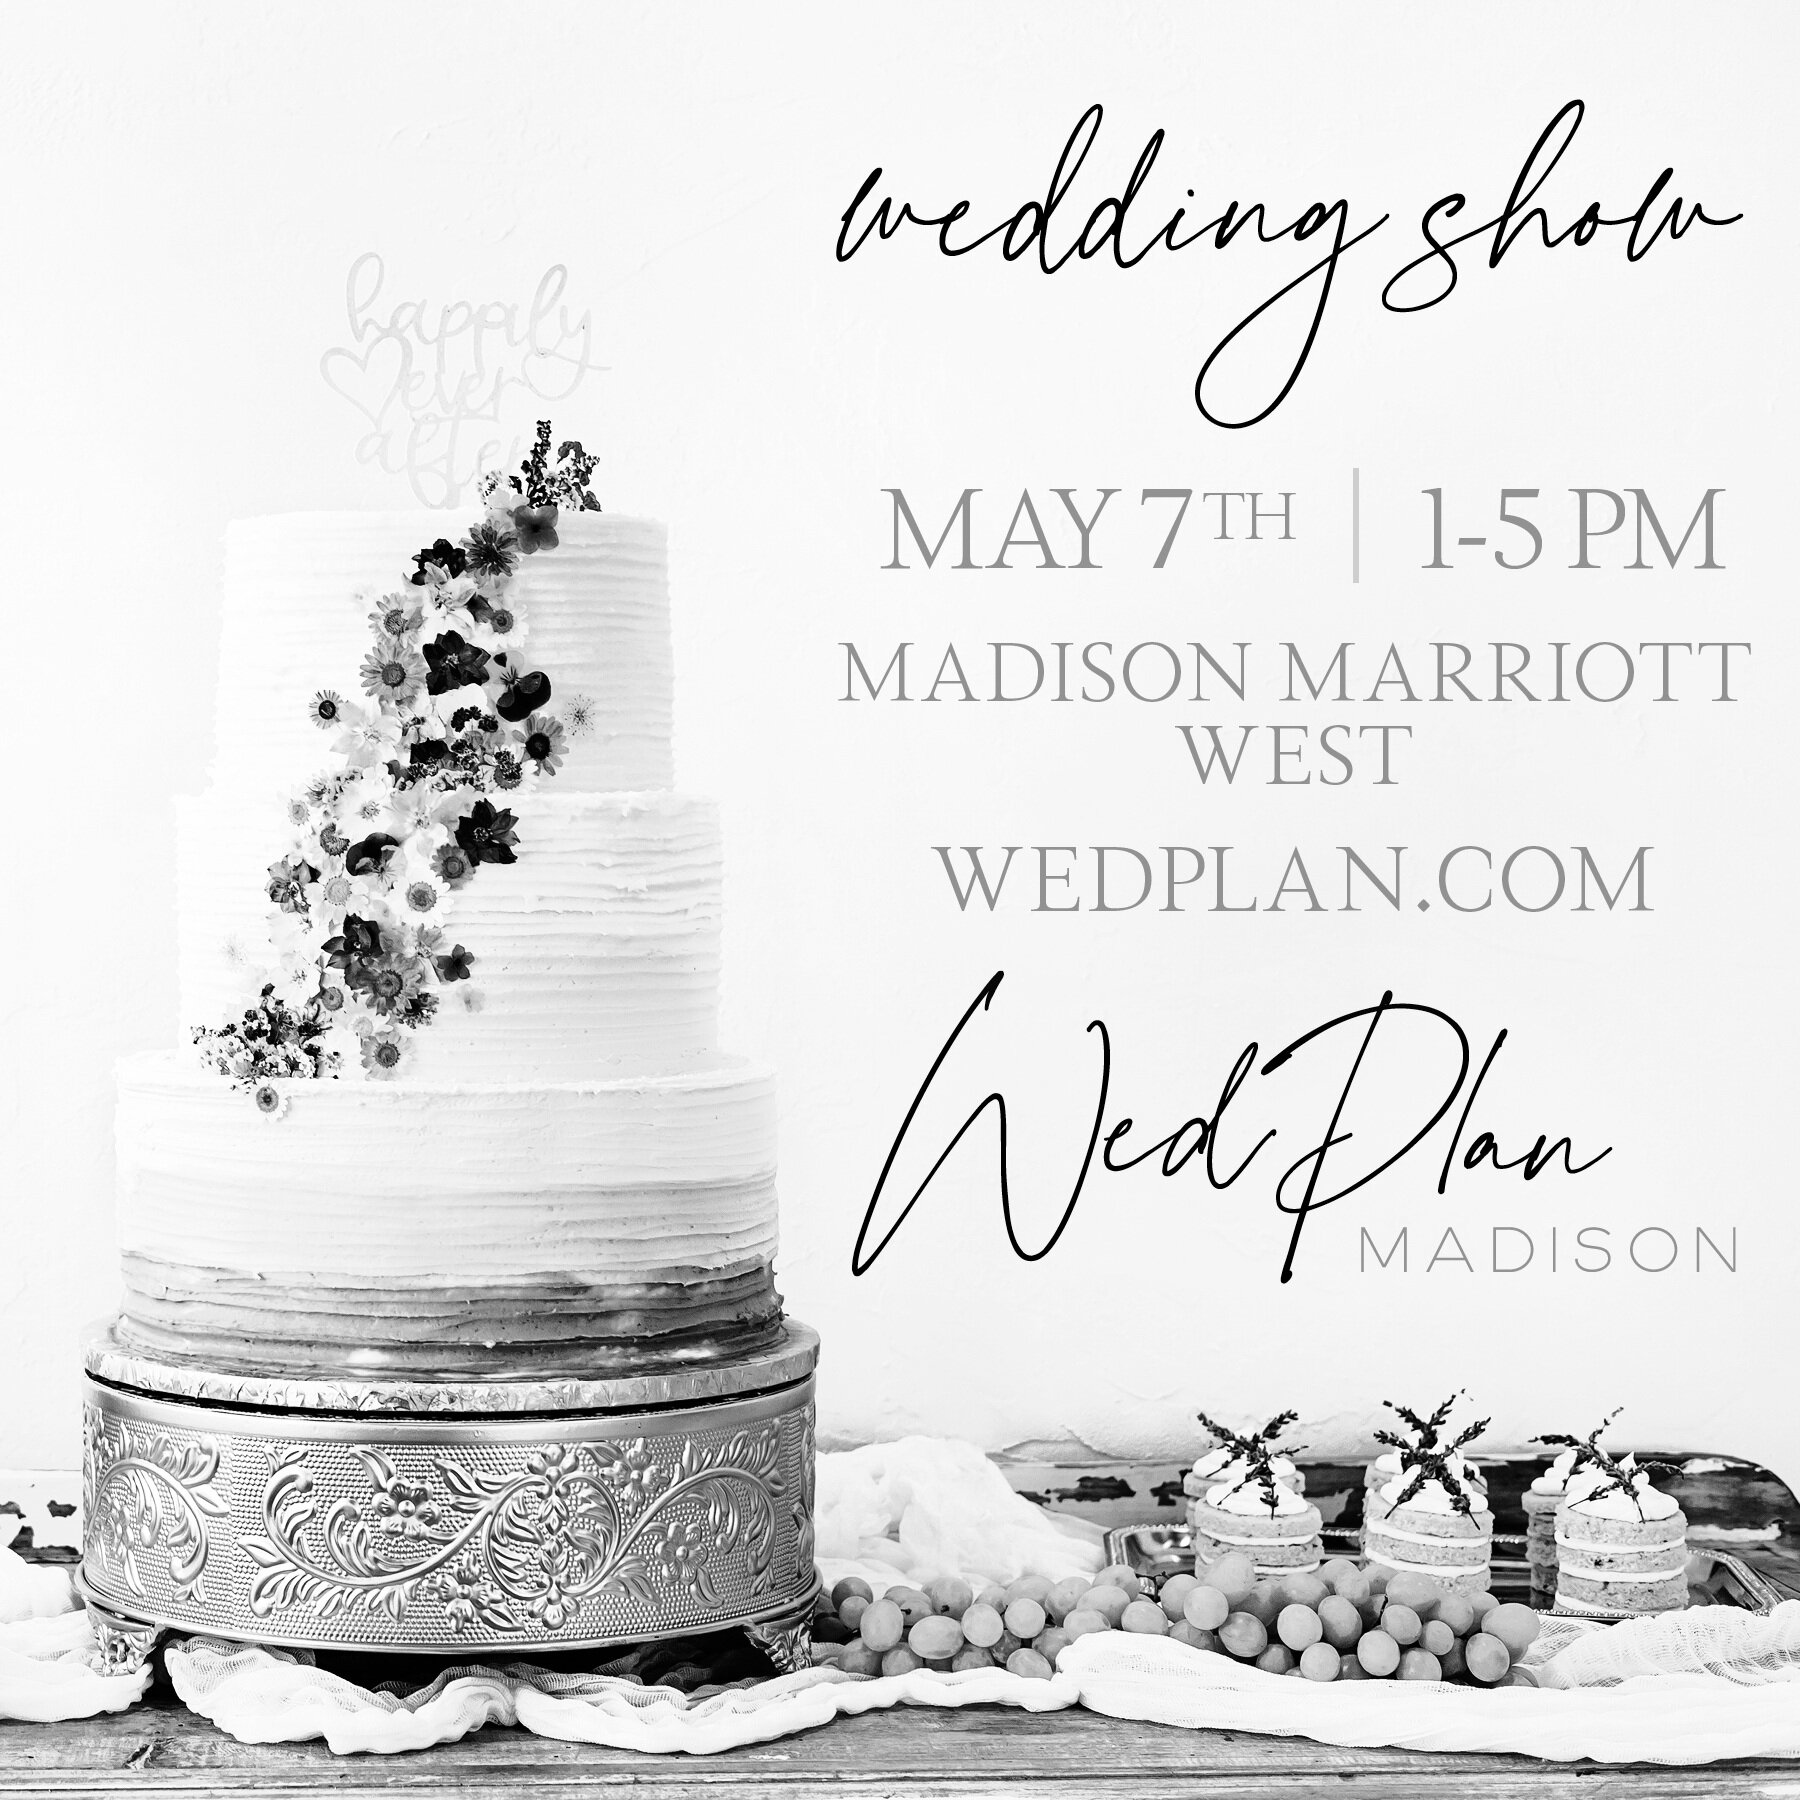 Todays the day, the sun is shining...the wedding show is here! Hosted by @wedplanmadison !!
Come stop by my booth, cant wait to see you all there! 
.
.
.
.
.
#bridalshow #weddingshow #weddingexpo #weddingshopmadison #madisonwi  #weddingplanningtips #